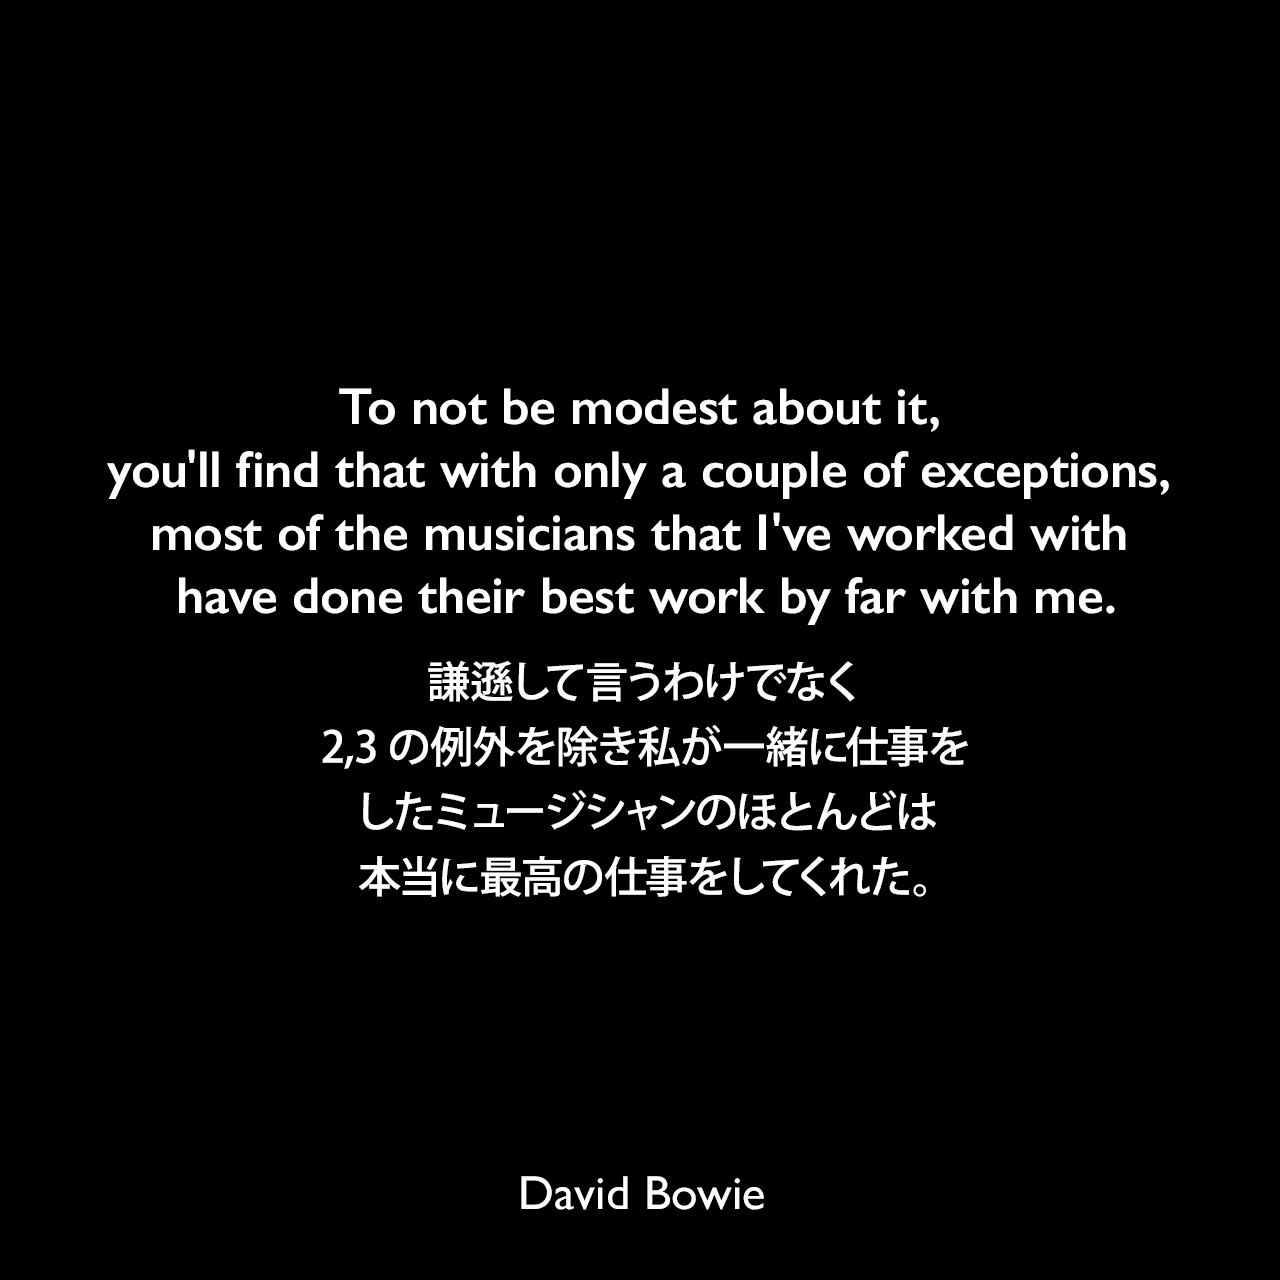 To not be modest about it, you'll find that with only a couple of exceptions, most of the musicians that I've worked with have done their best work by far with me.謙遜して言うわけでなく、2,3の例外を除き私が一緒に仕事をしたミュージシャンのほとんどは本当に最高の仕事をしてくれた。David Bowie